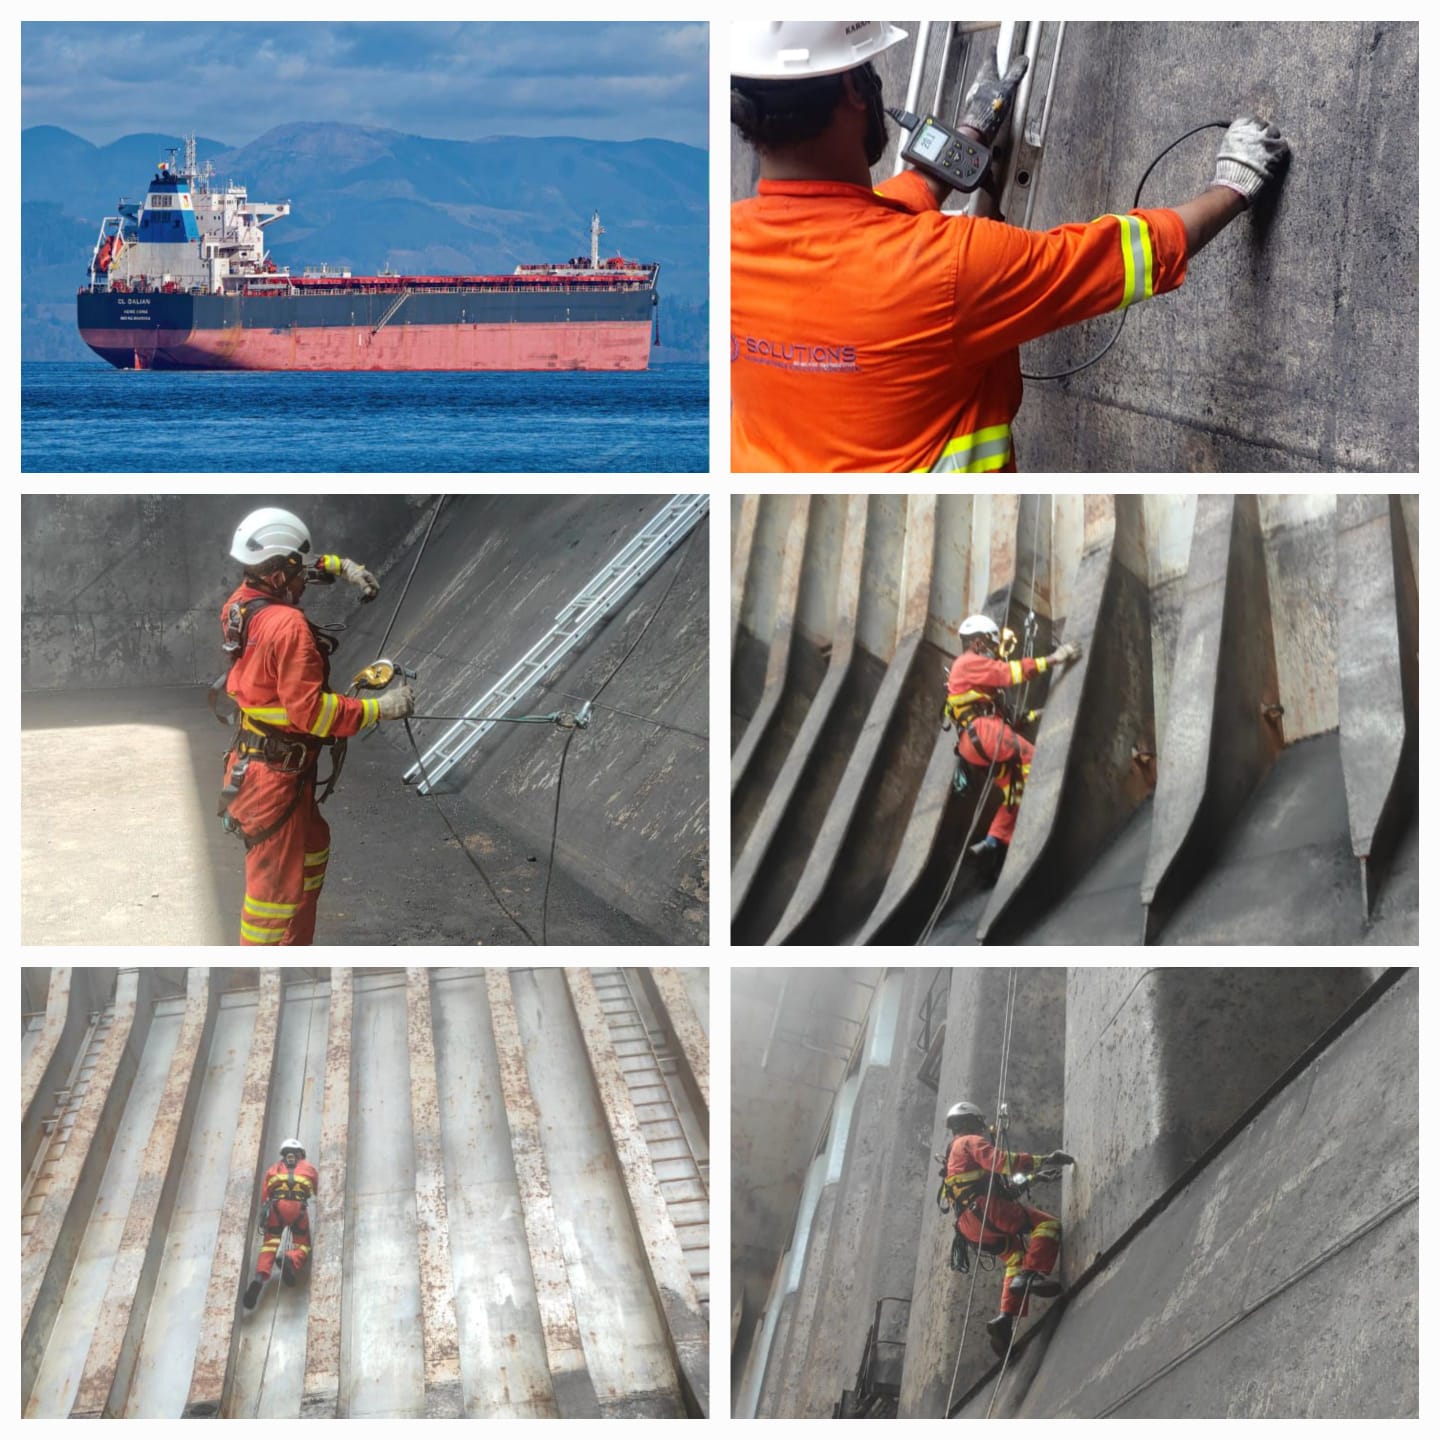 JOB DONE- UTM Survey has been successful completed for MV CL DALIAN (vessel) @ Jaigarh Port india.